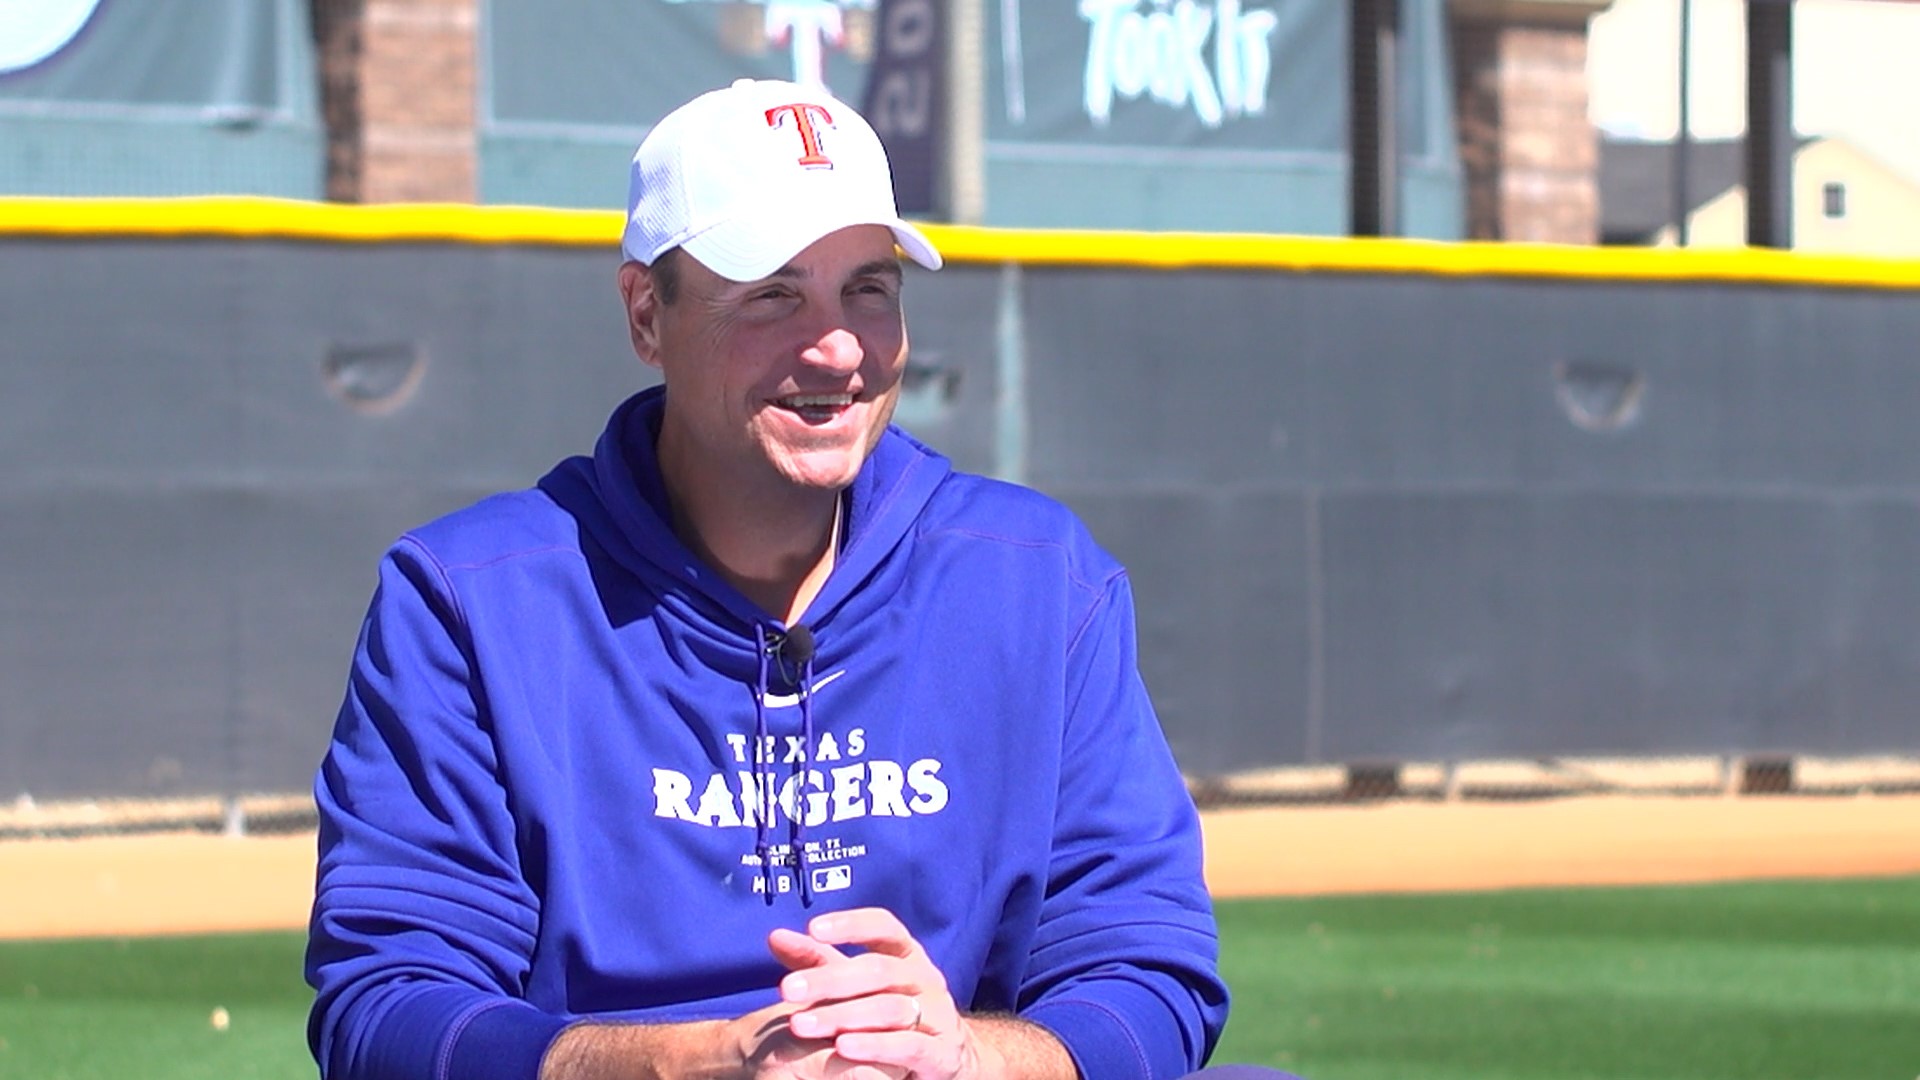 Texas Rangers General Manager Chris Young sat down with WFAA's Joe Trahan for an extended interview on the World Series and upcoming season.